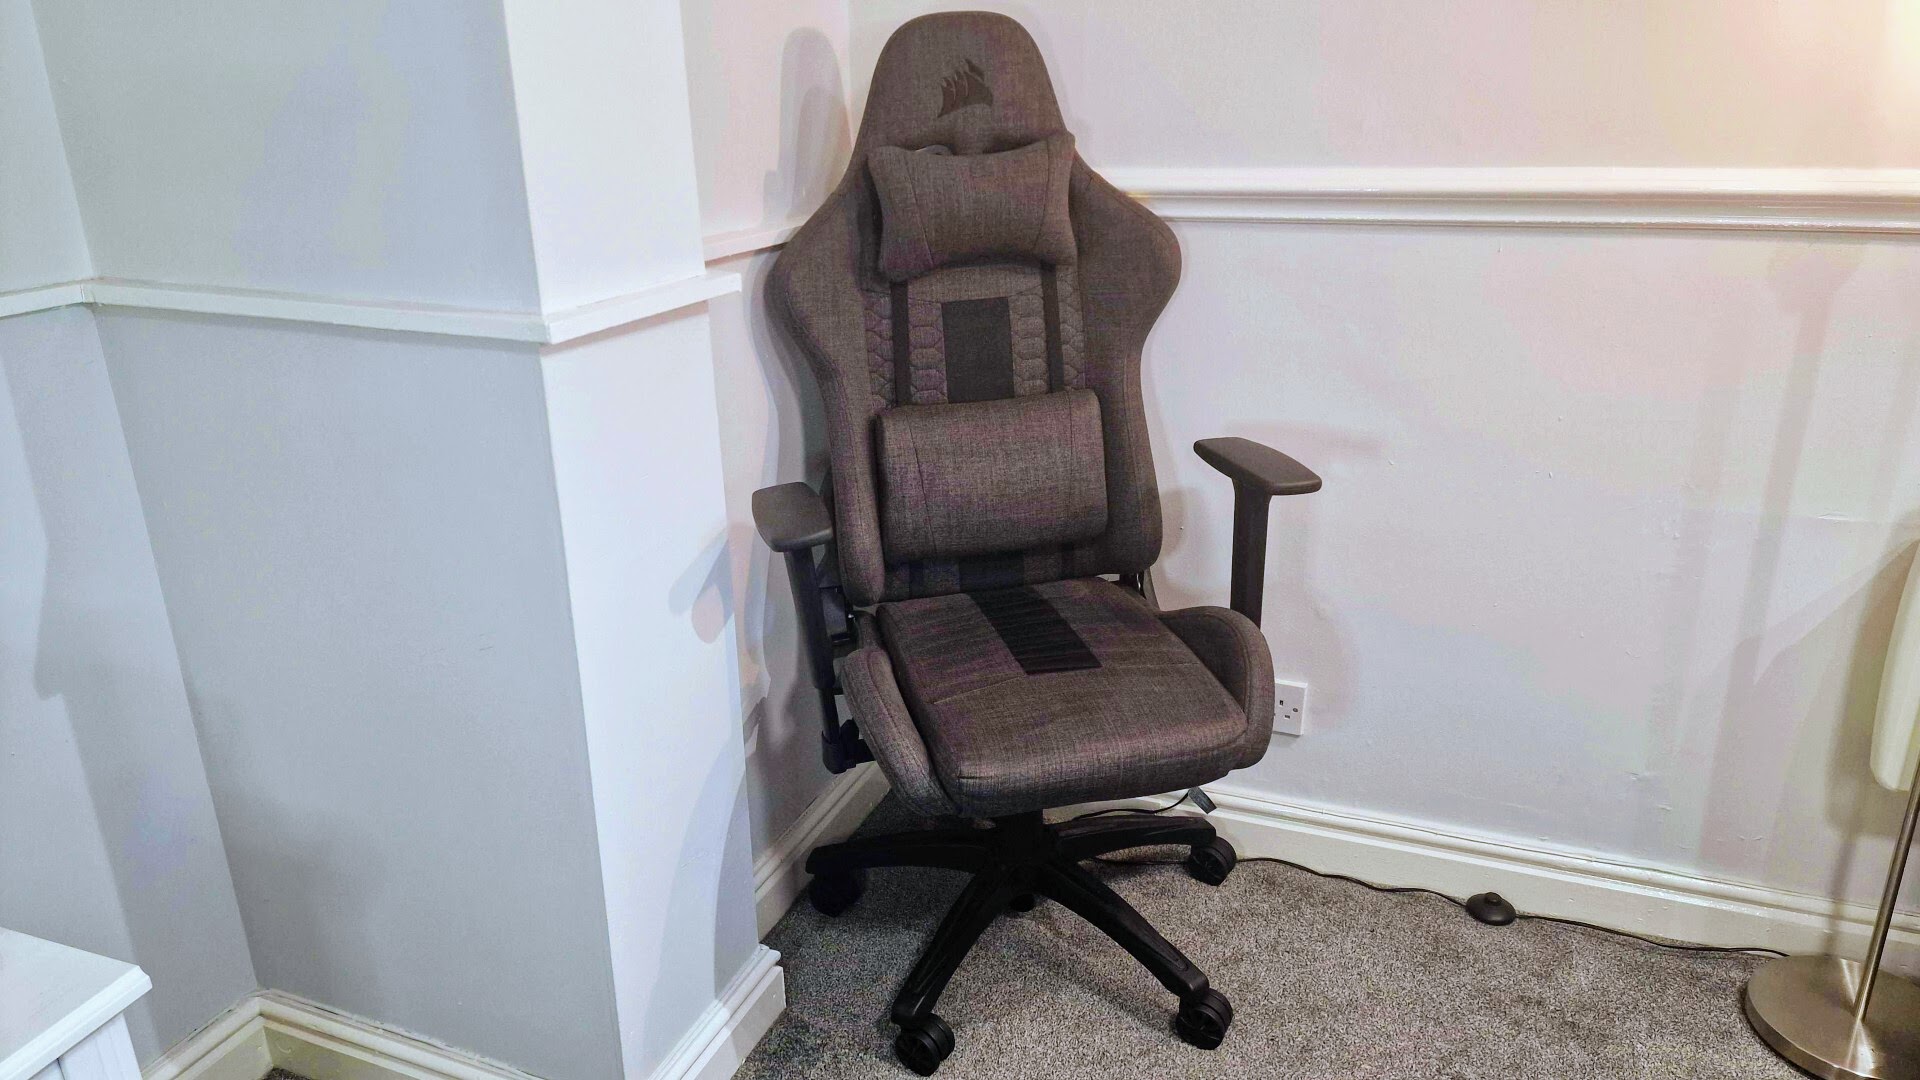 Corsair TC100 Relaxed review: A gaming chair pressed into the corner of a white room